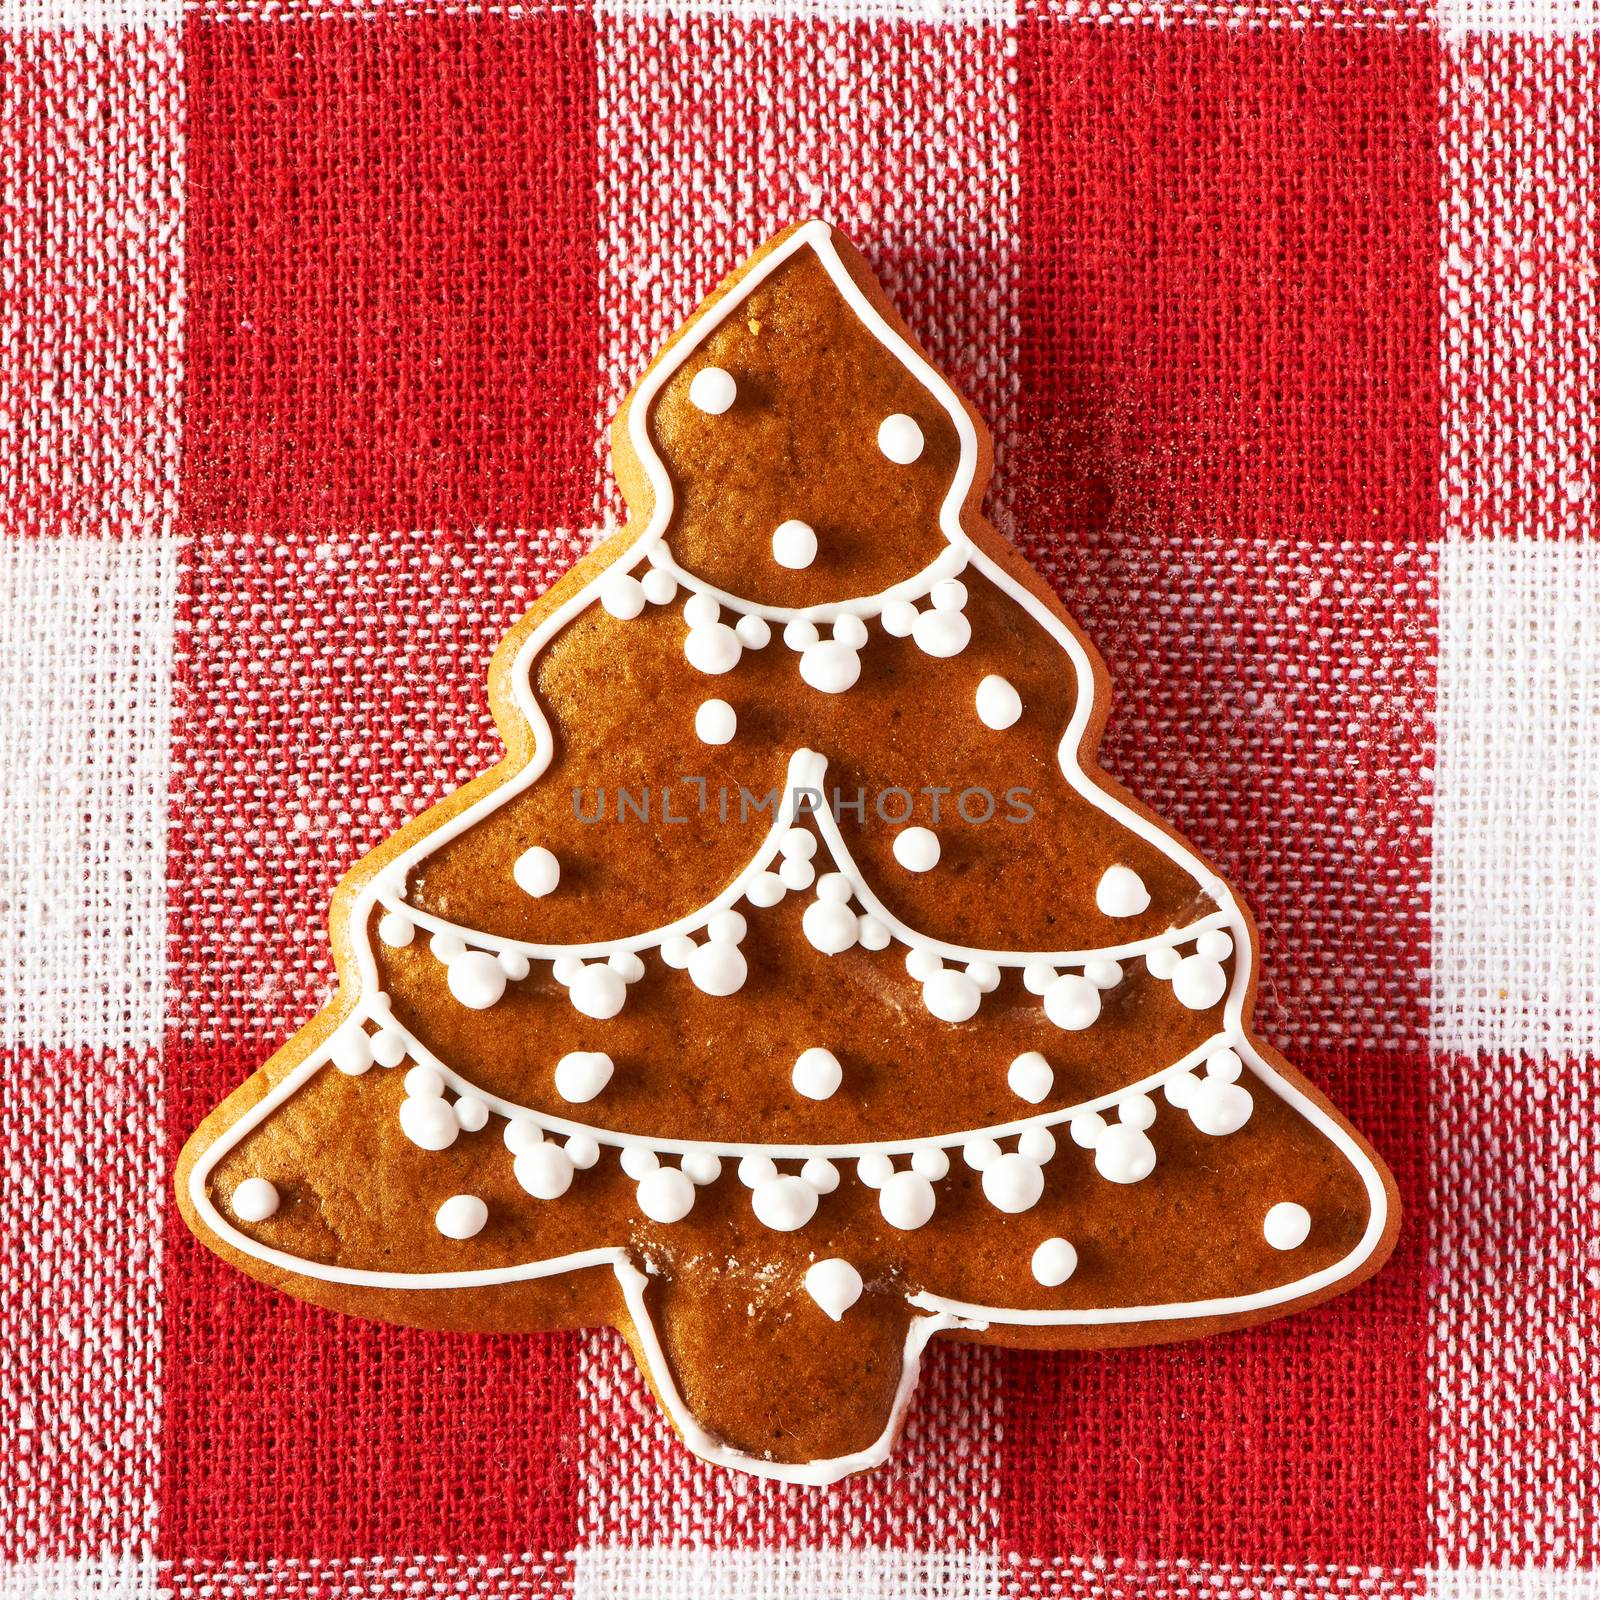 Christmas homemade gingerbread cookie on tablecloth